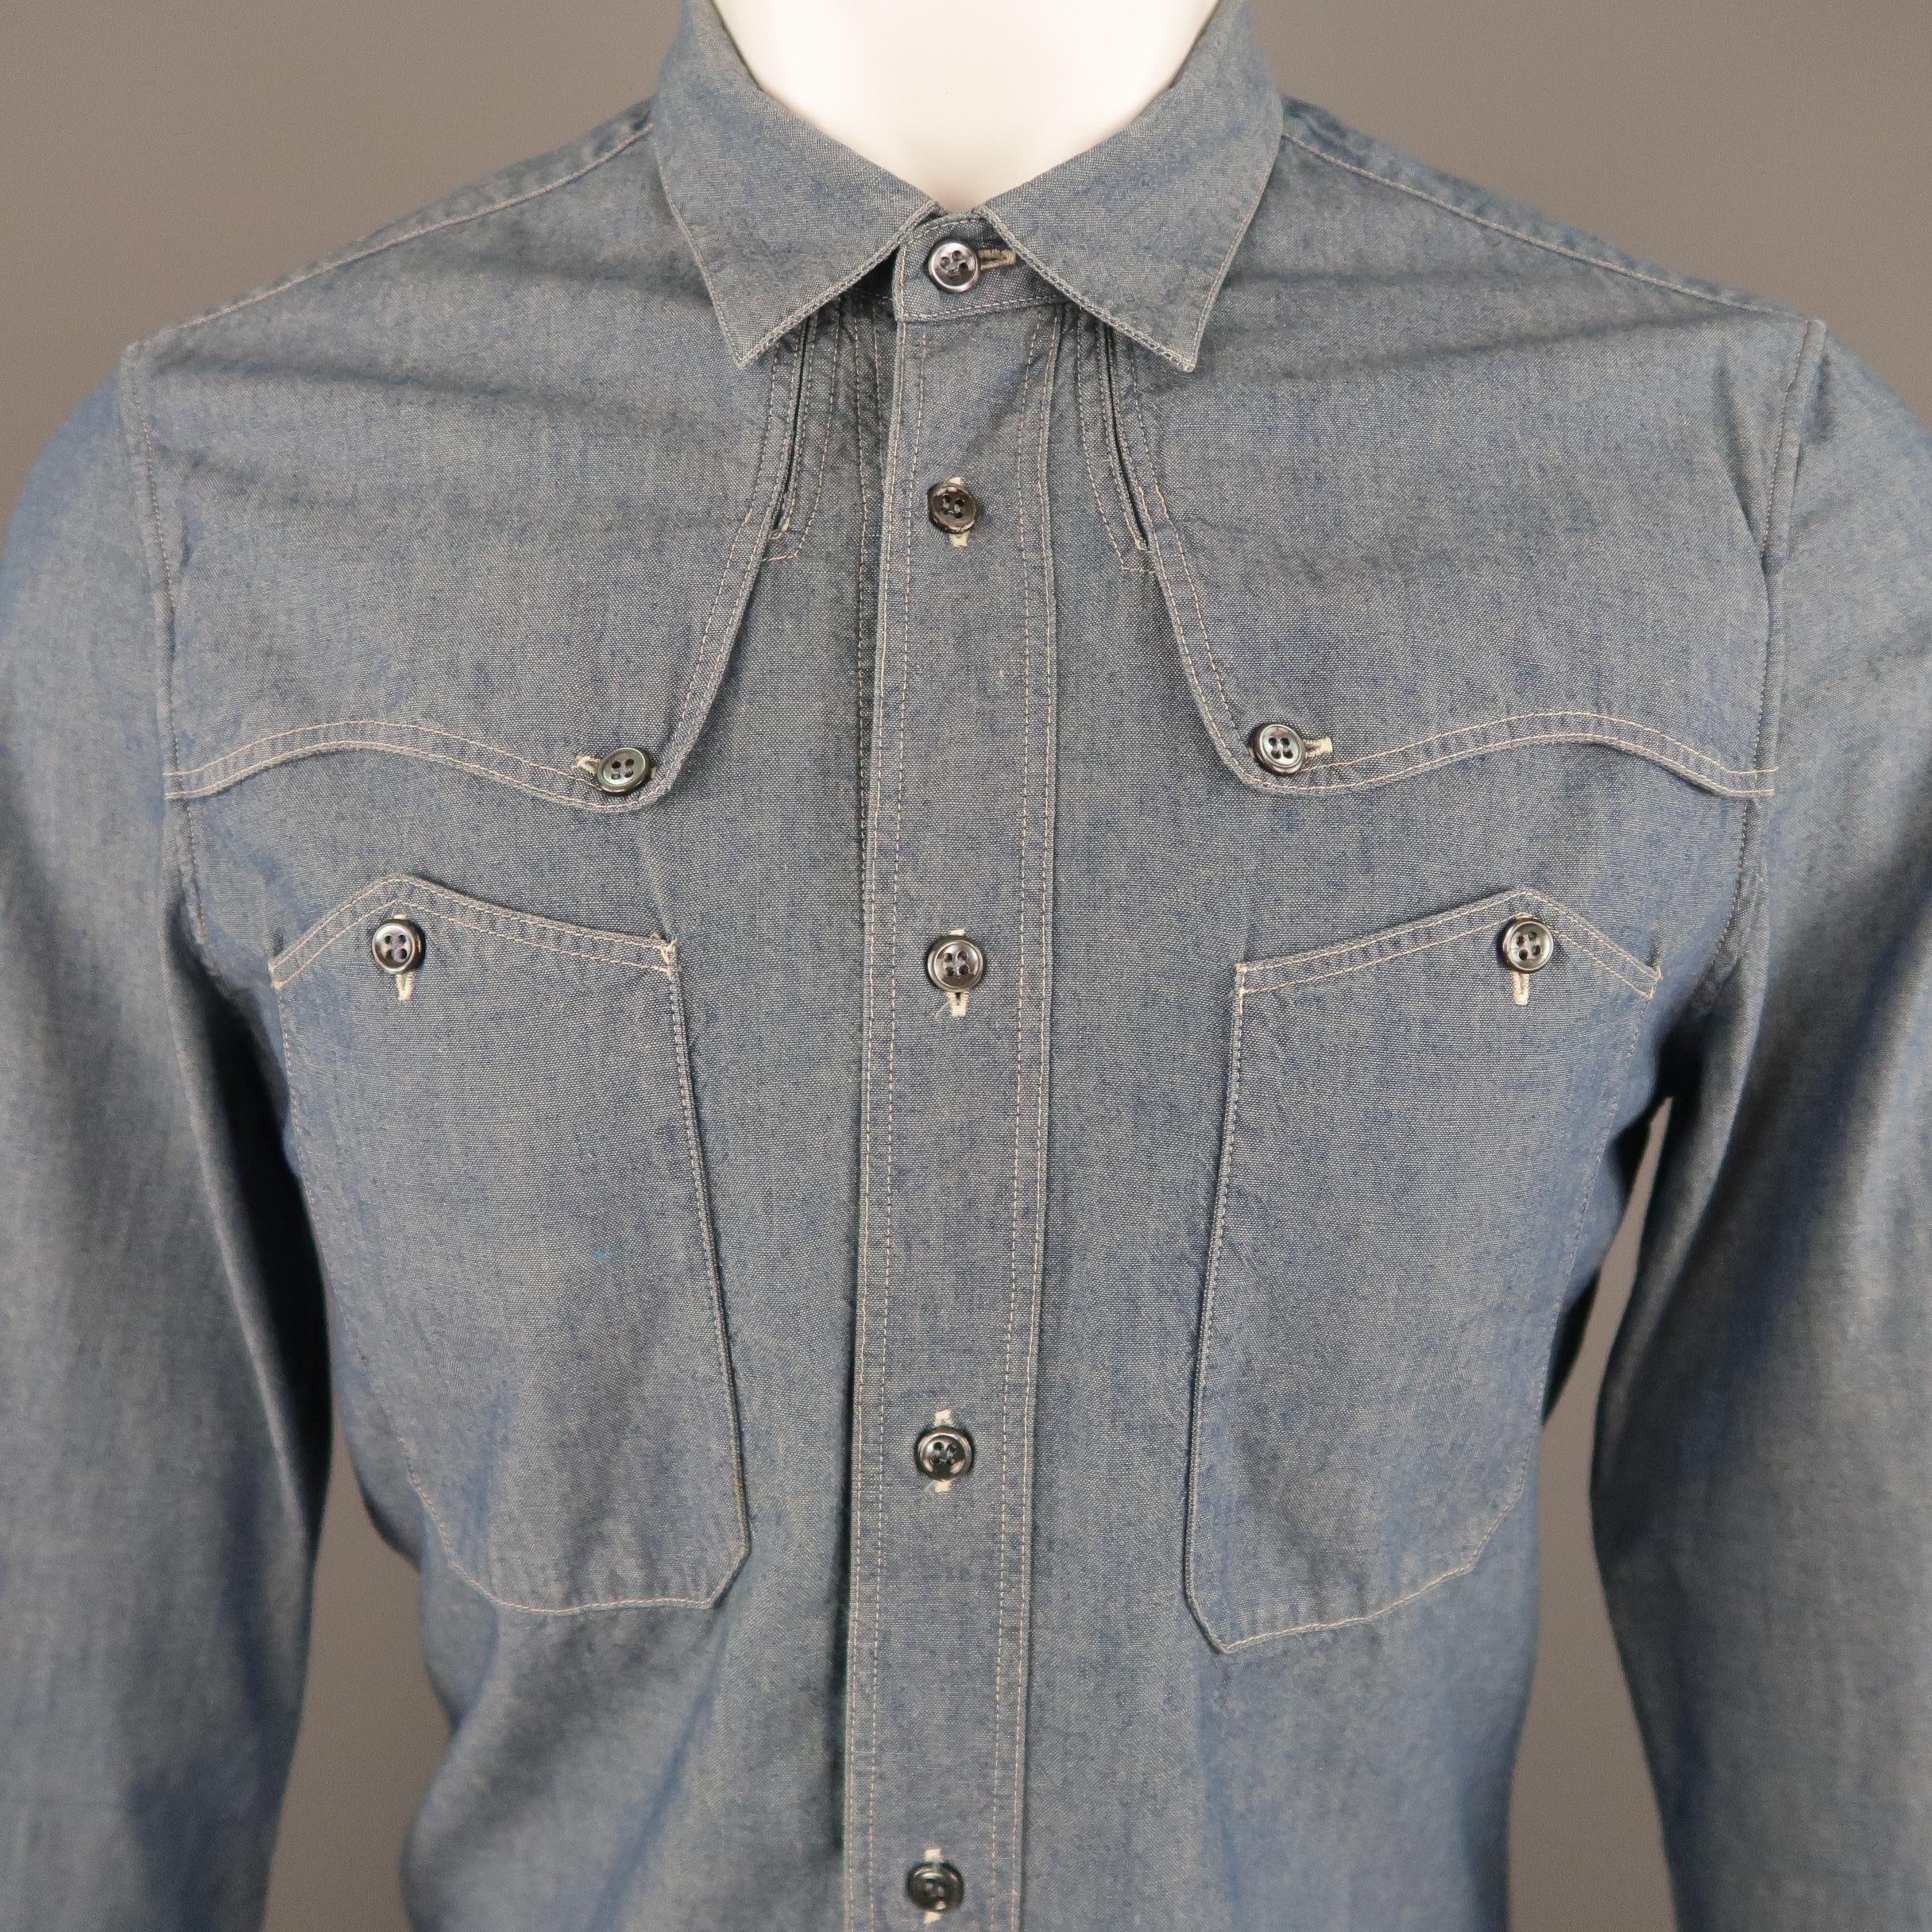 BALENCIAGA button up comes in blue chambray with a pointed collar, shoulder overlay, patch button chest pockets, and patchwork back. Spots on chest and sleeve and minor wear around collar. As-is. Made in Italy.
 
Good Pre-Owned Condition.
Marked: